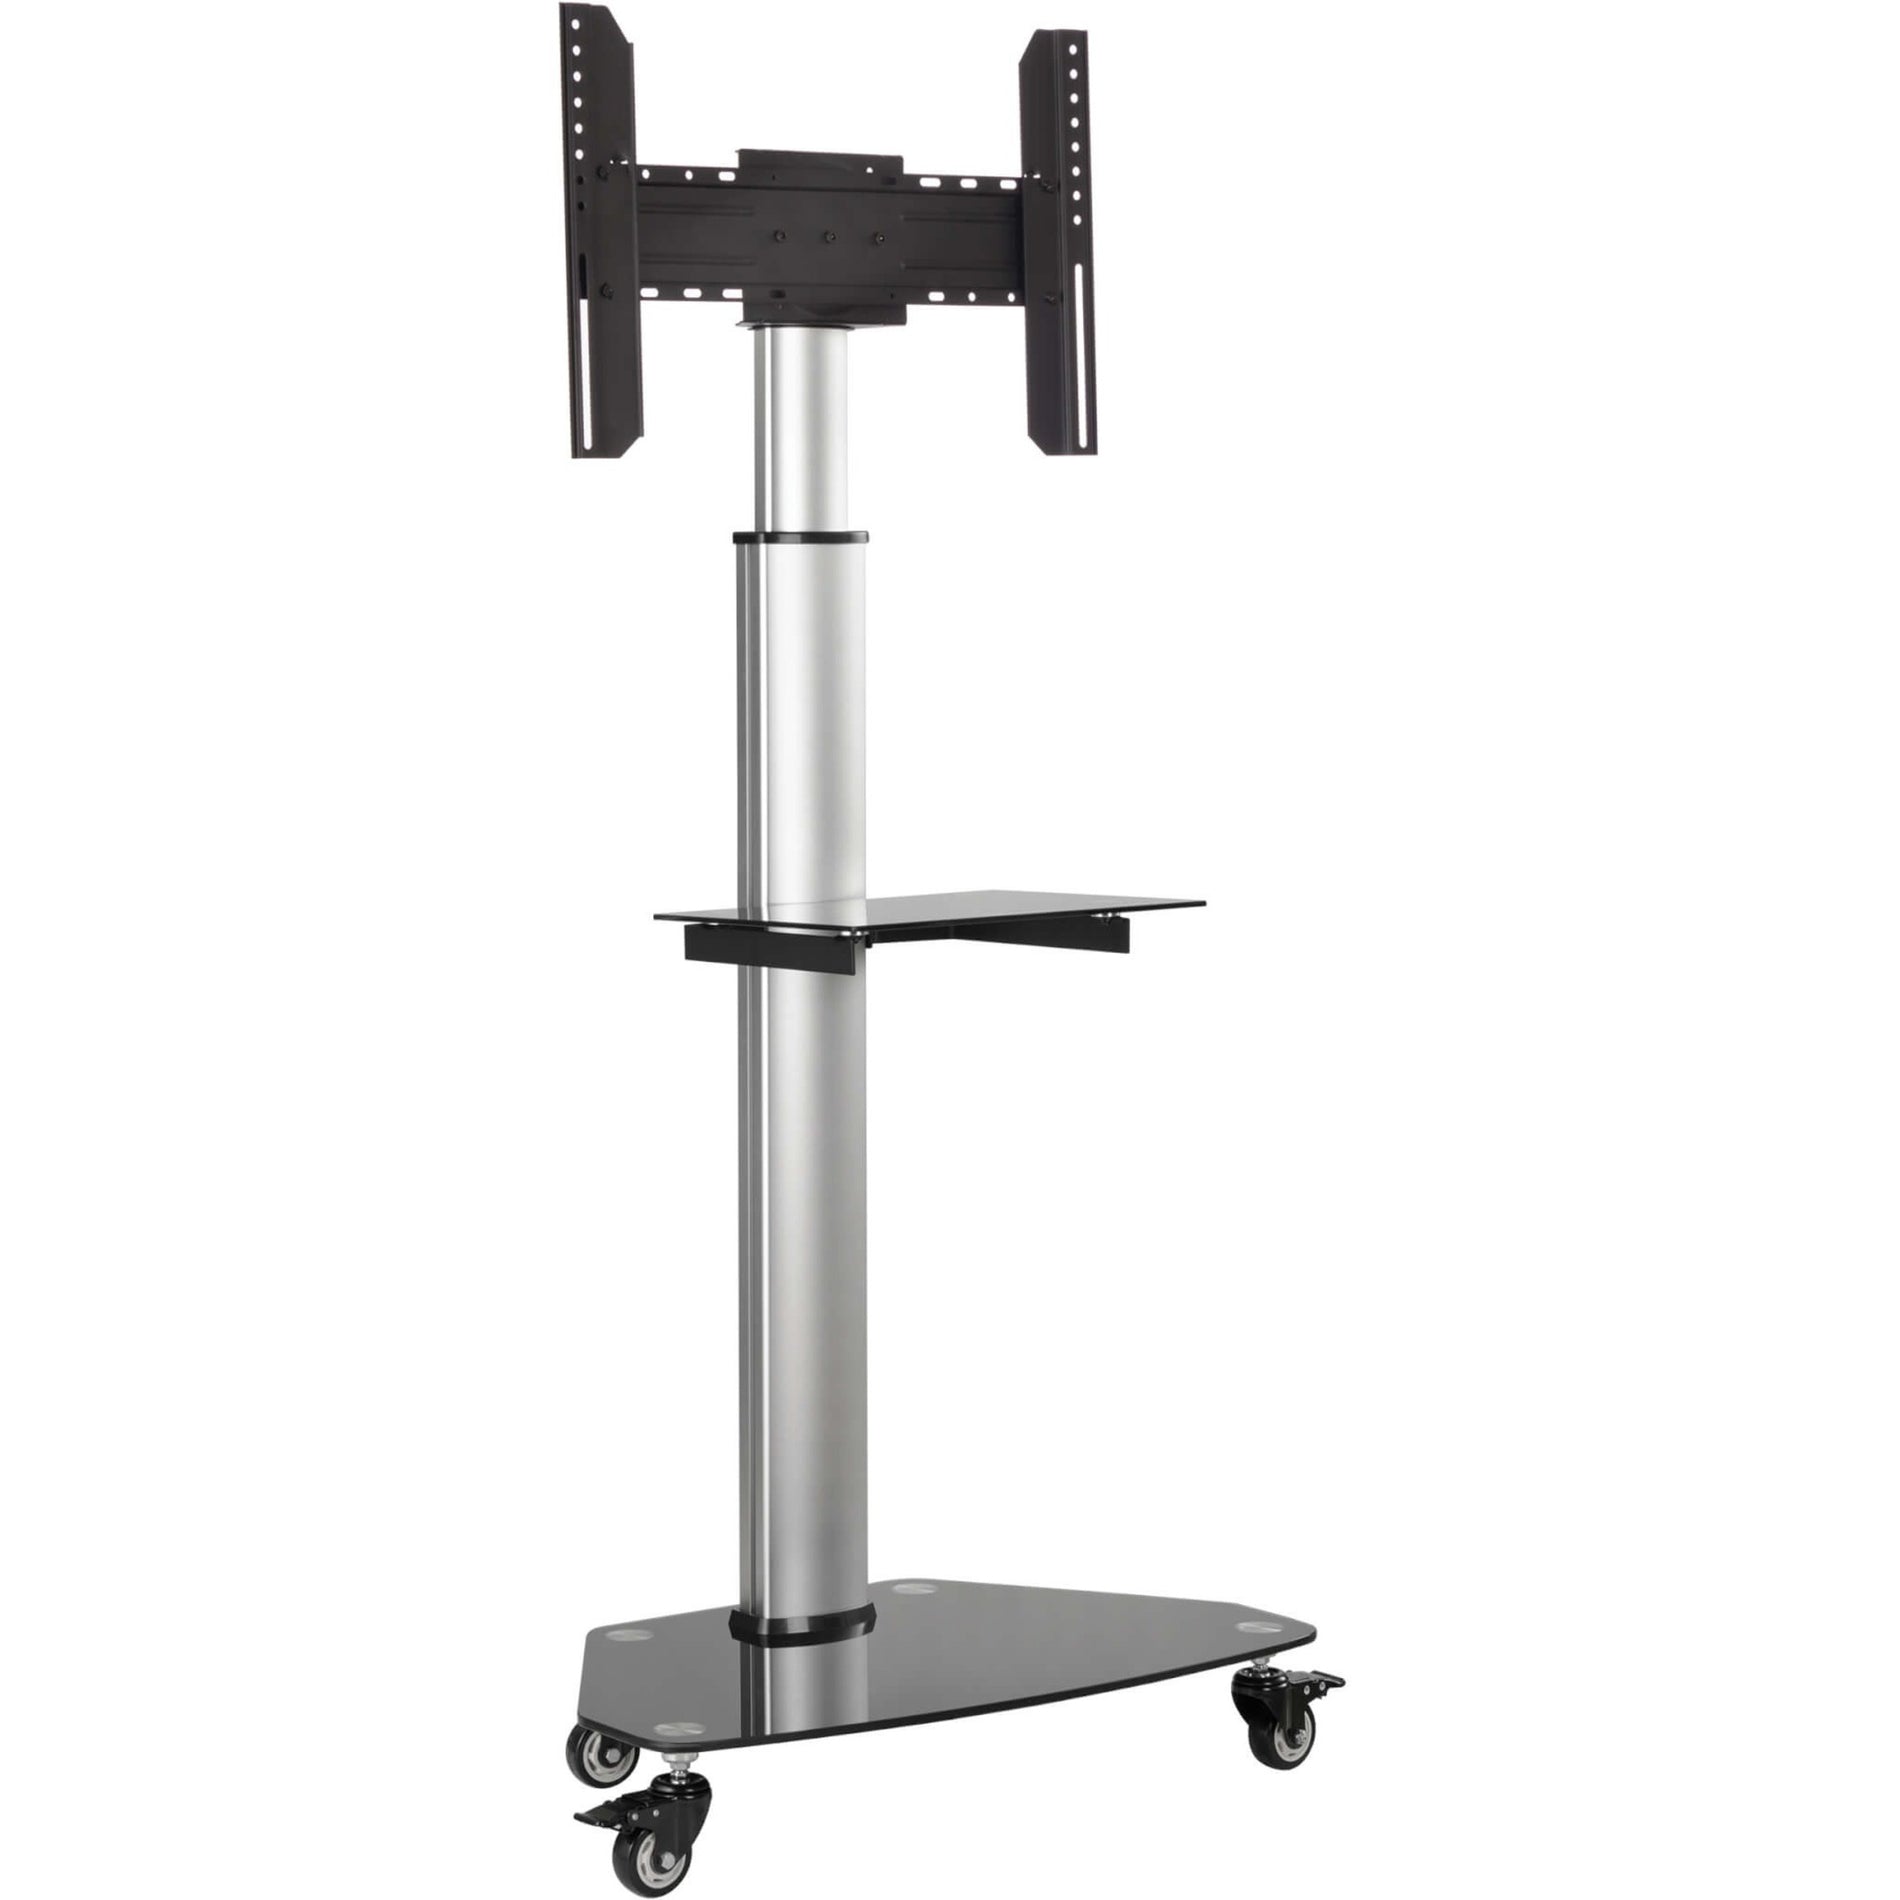 Tripp Lite DMCS3770SG75 Premier Rolling TV Cart, Durable, Adjustable Height, 37-70in, 175 lb Capacity